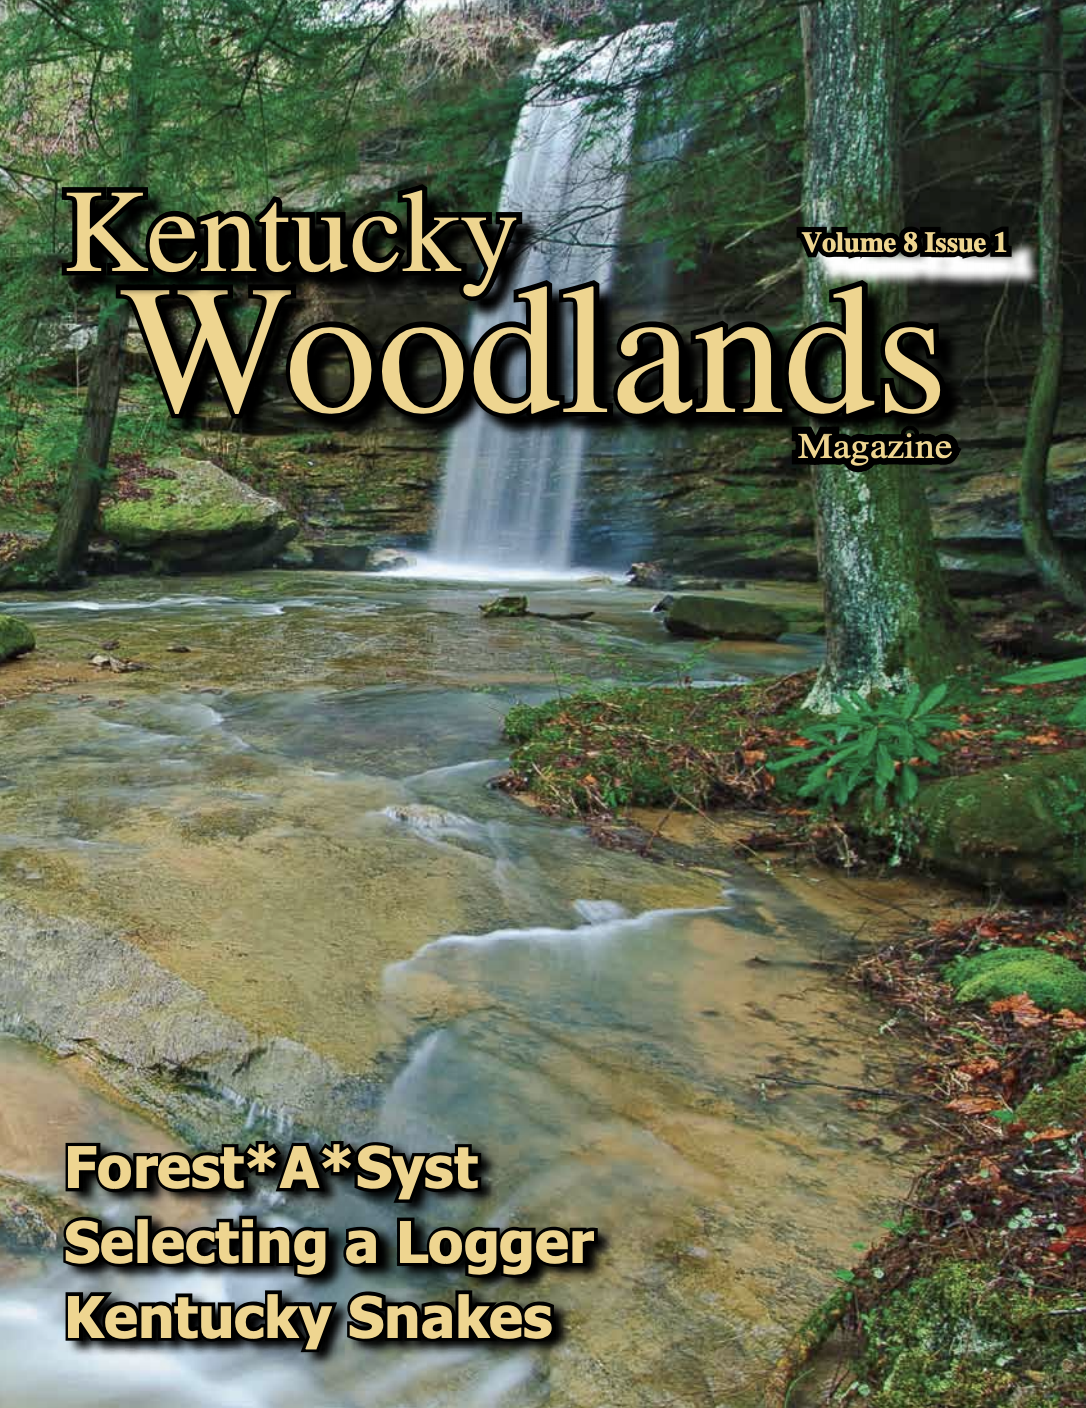 Kentucky Woodlands Magazine, Volume 8, Issue 1 Cover